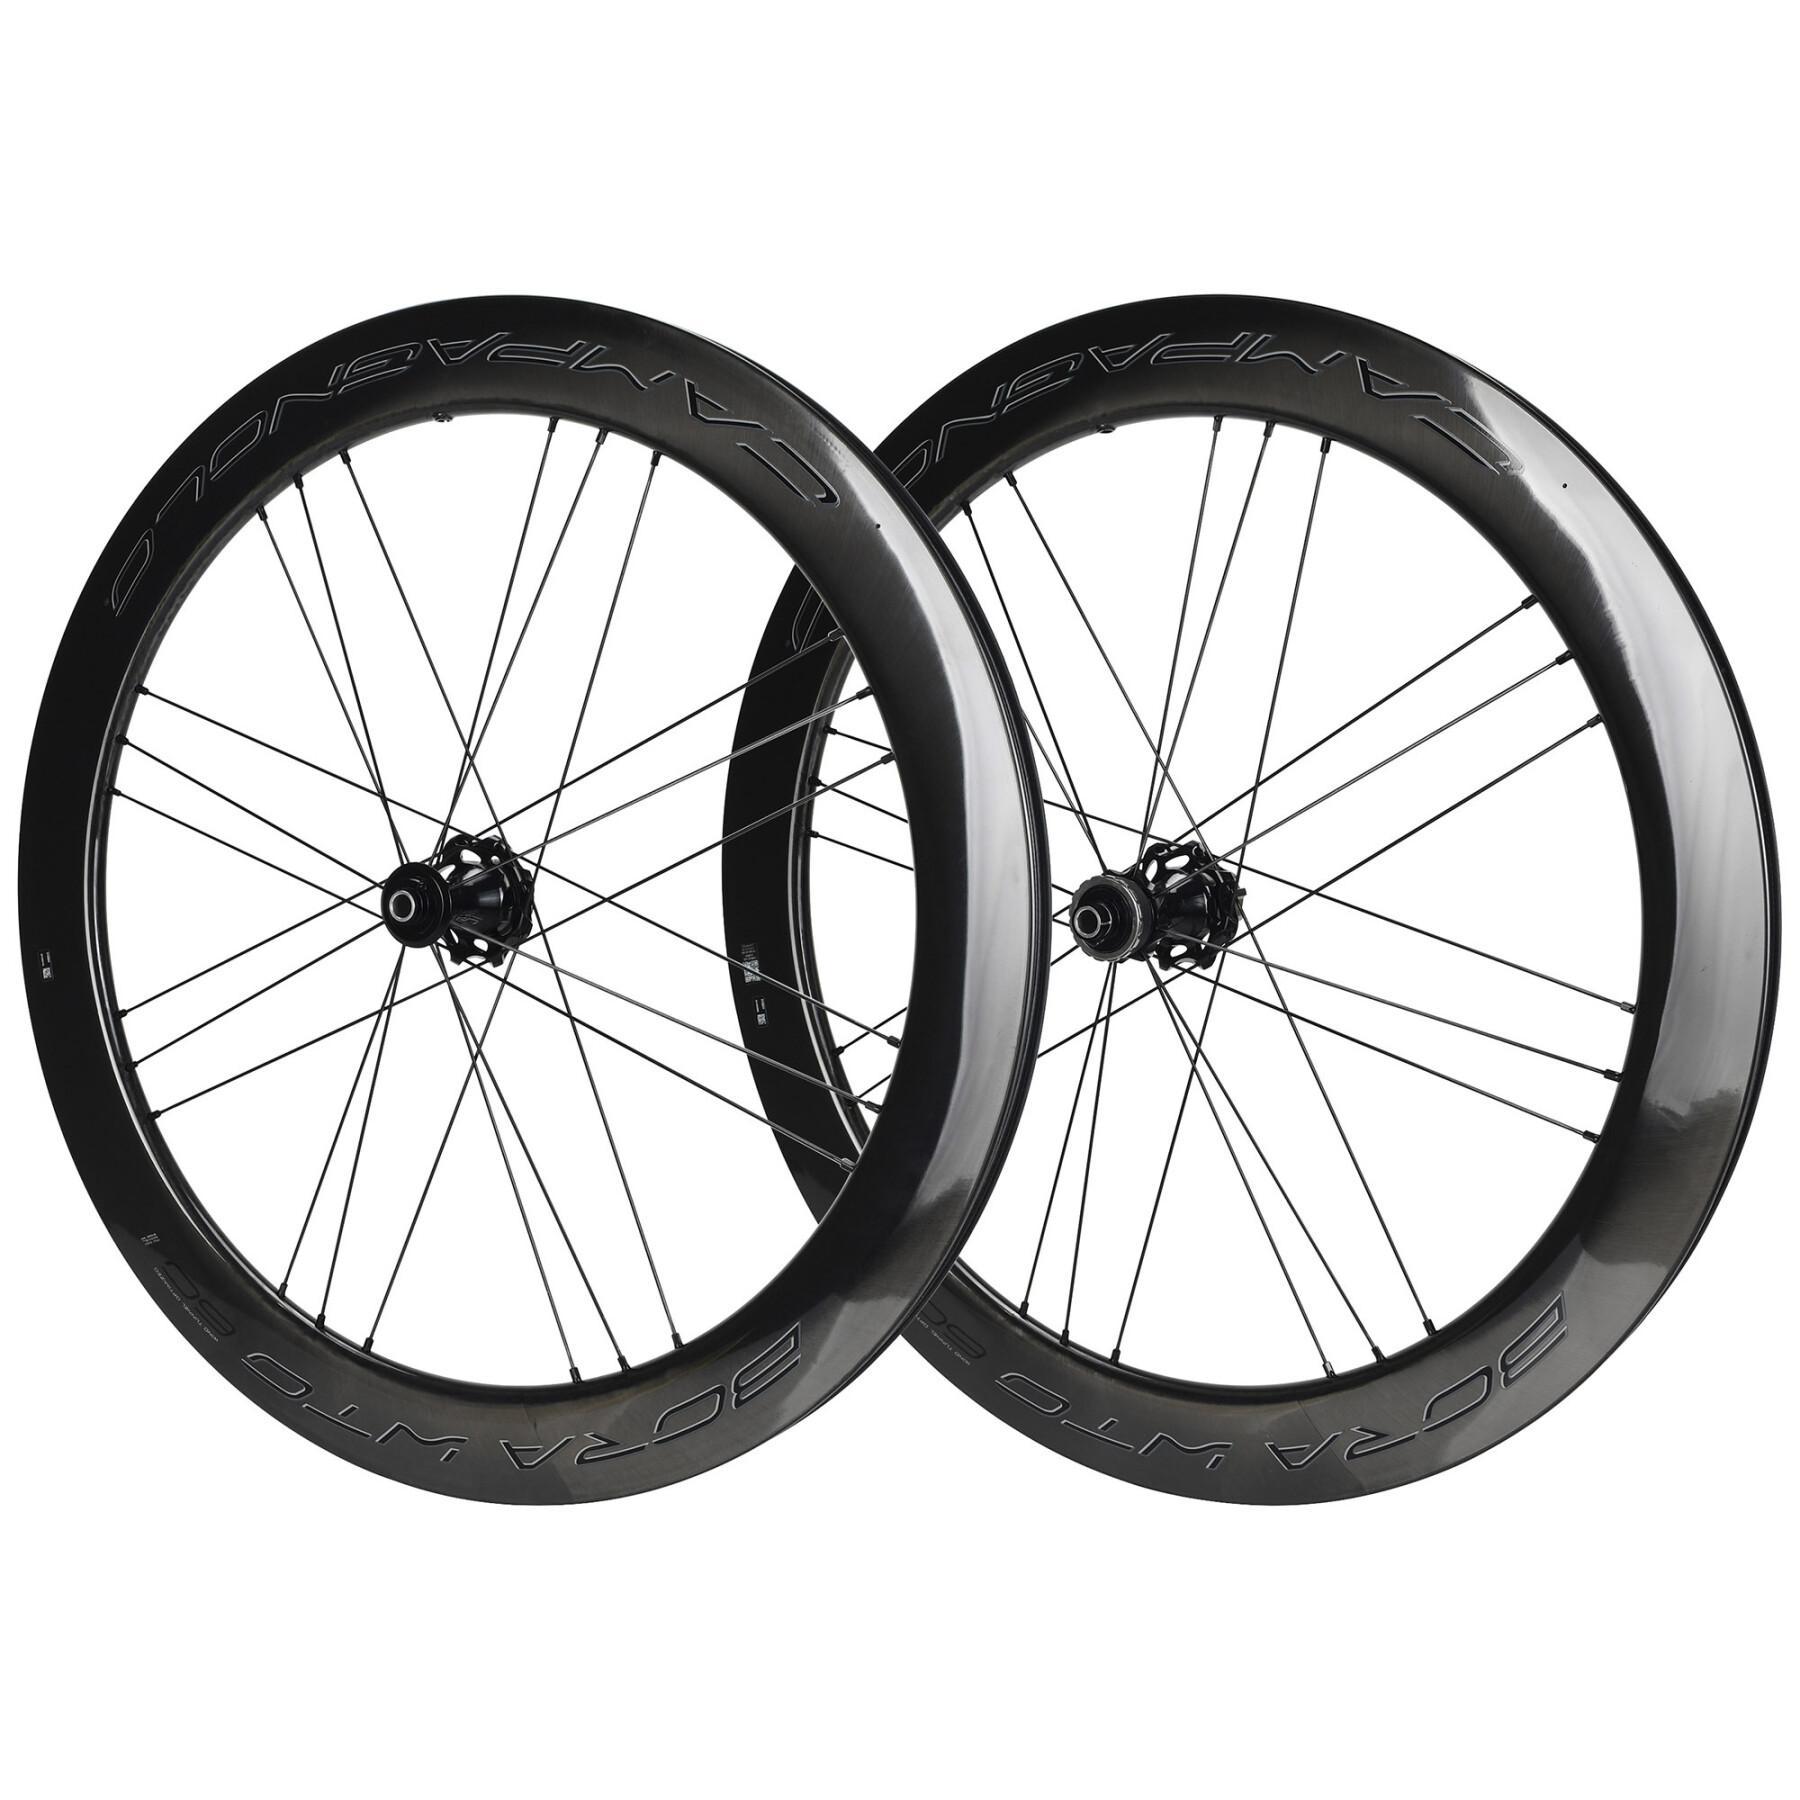 Uppsättning med 2 cykelhjul Campagnolo Bora Wto 60 2Wf Disque Tubeless Campagnolo